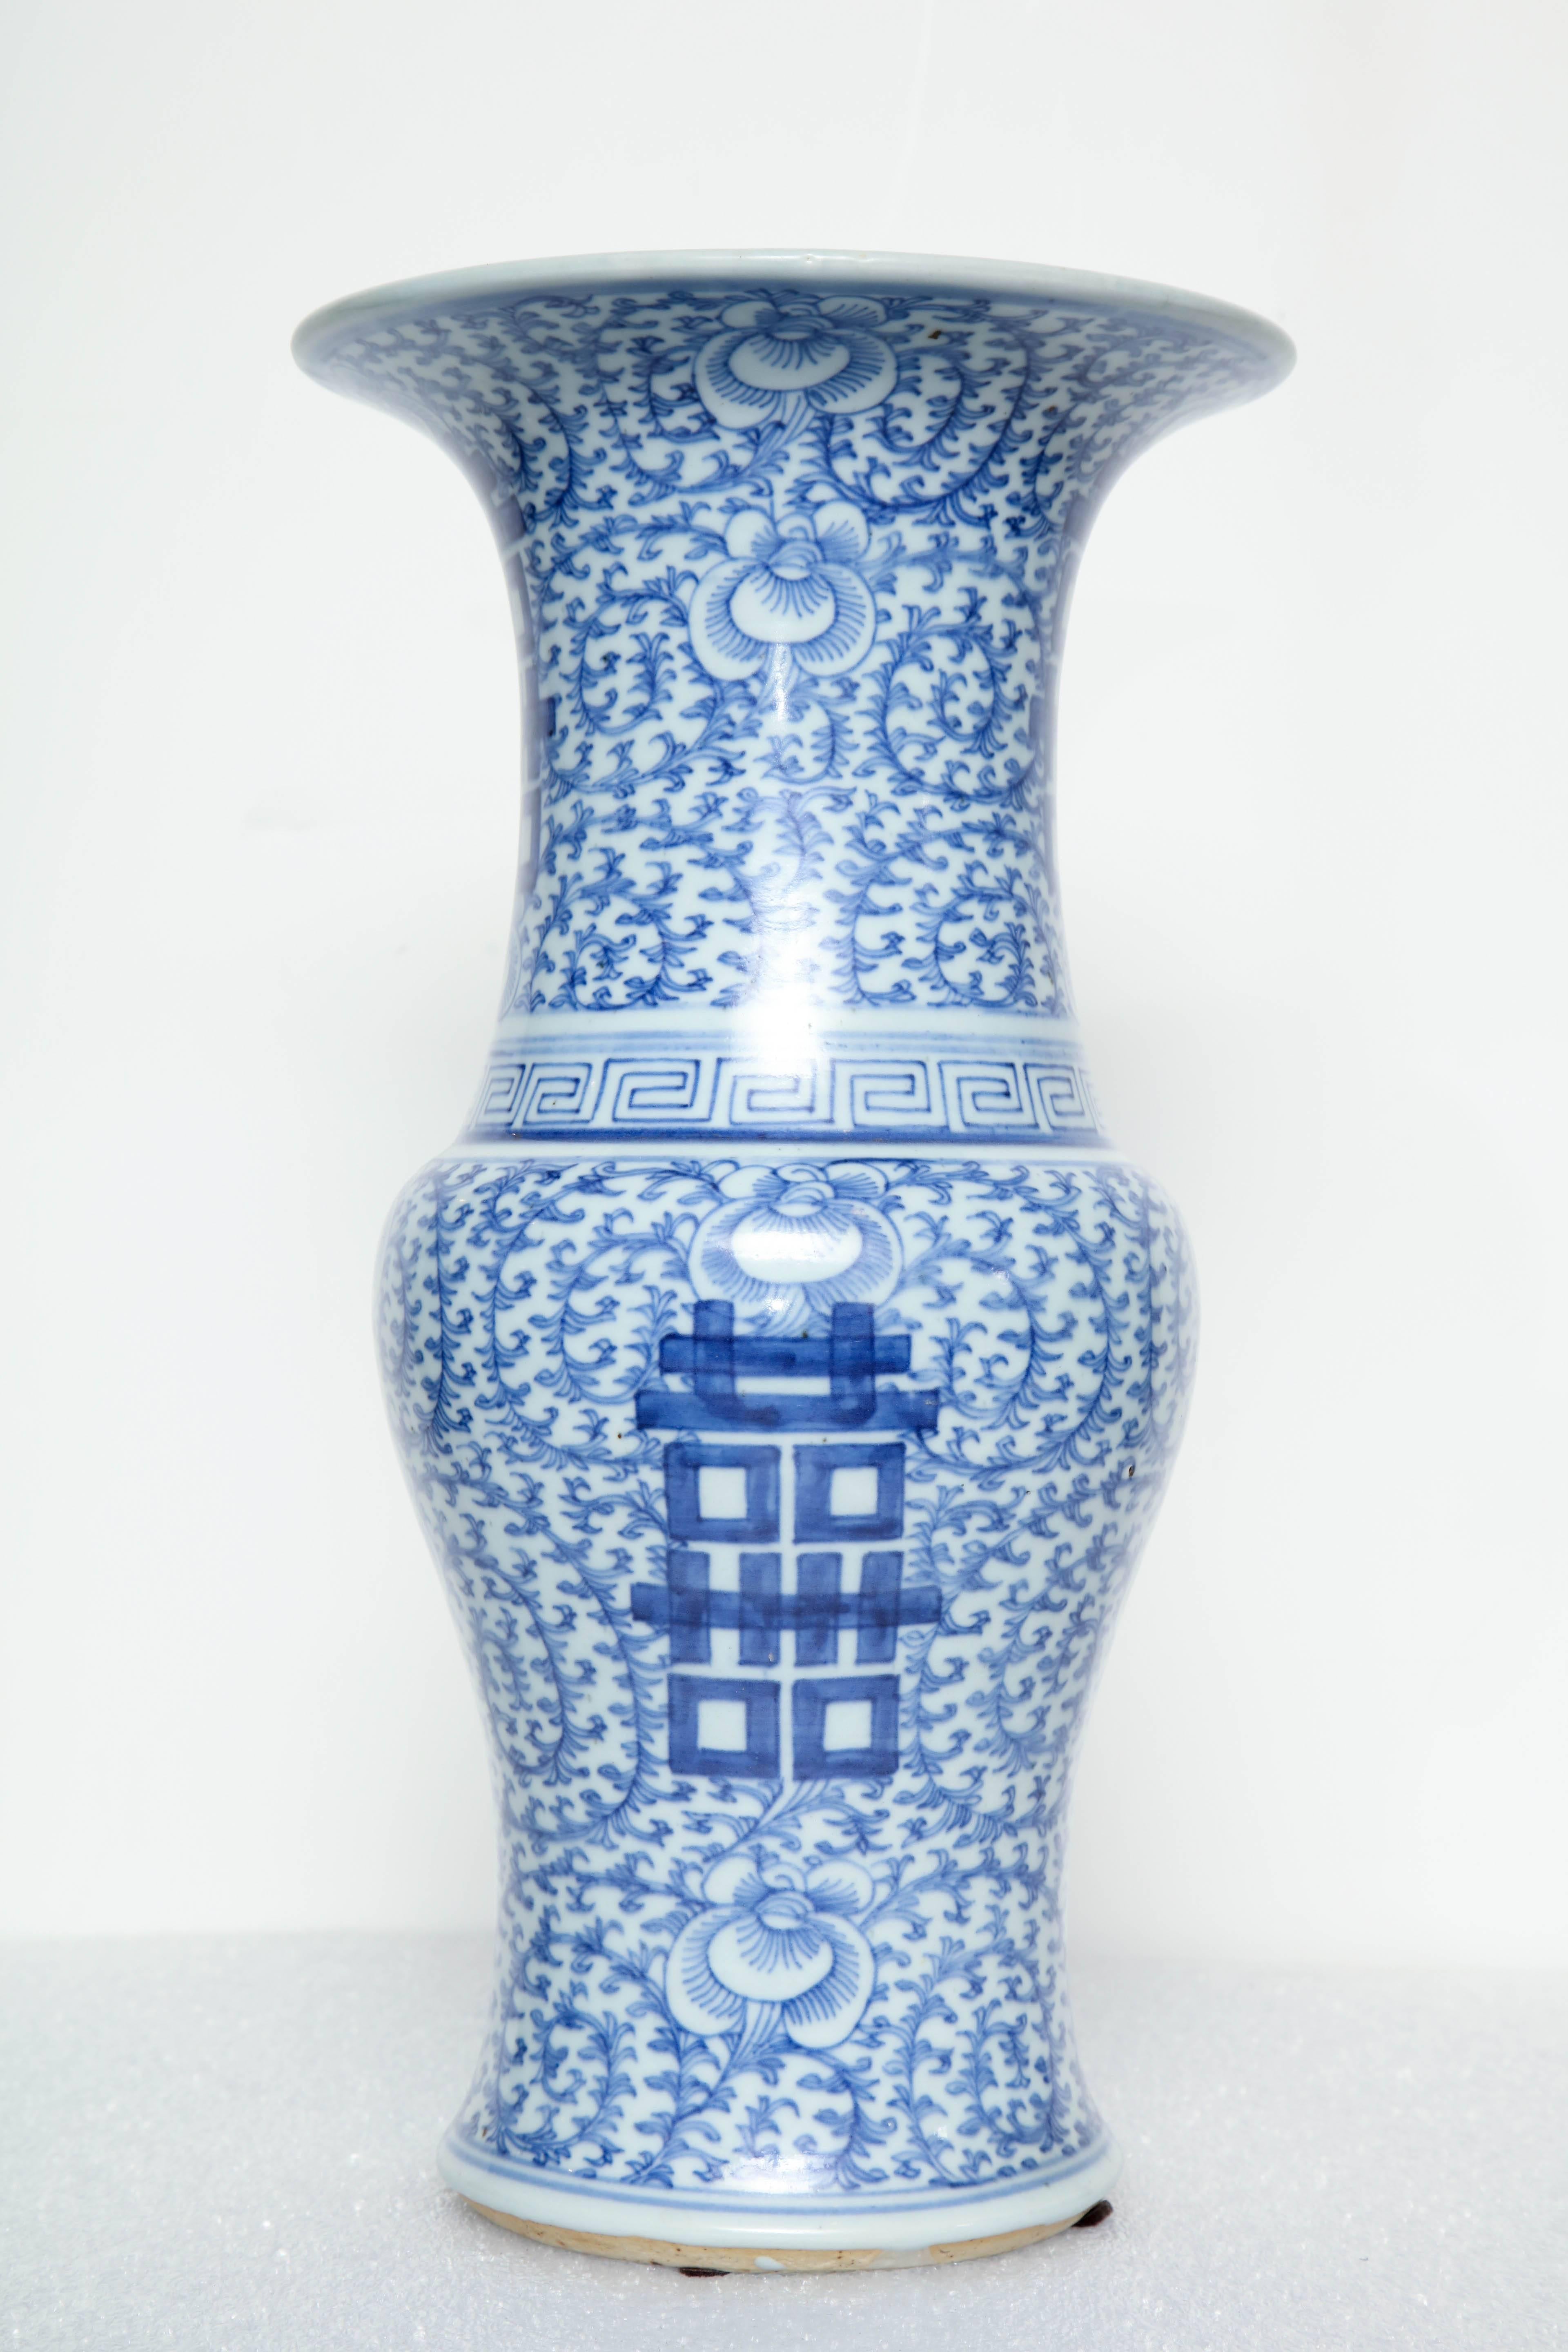 20th century Chinese blue and white vase with double happiness symbol.